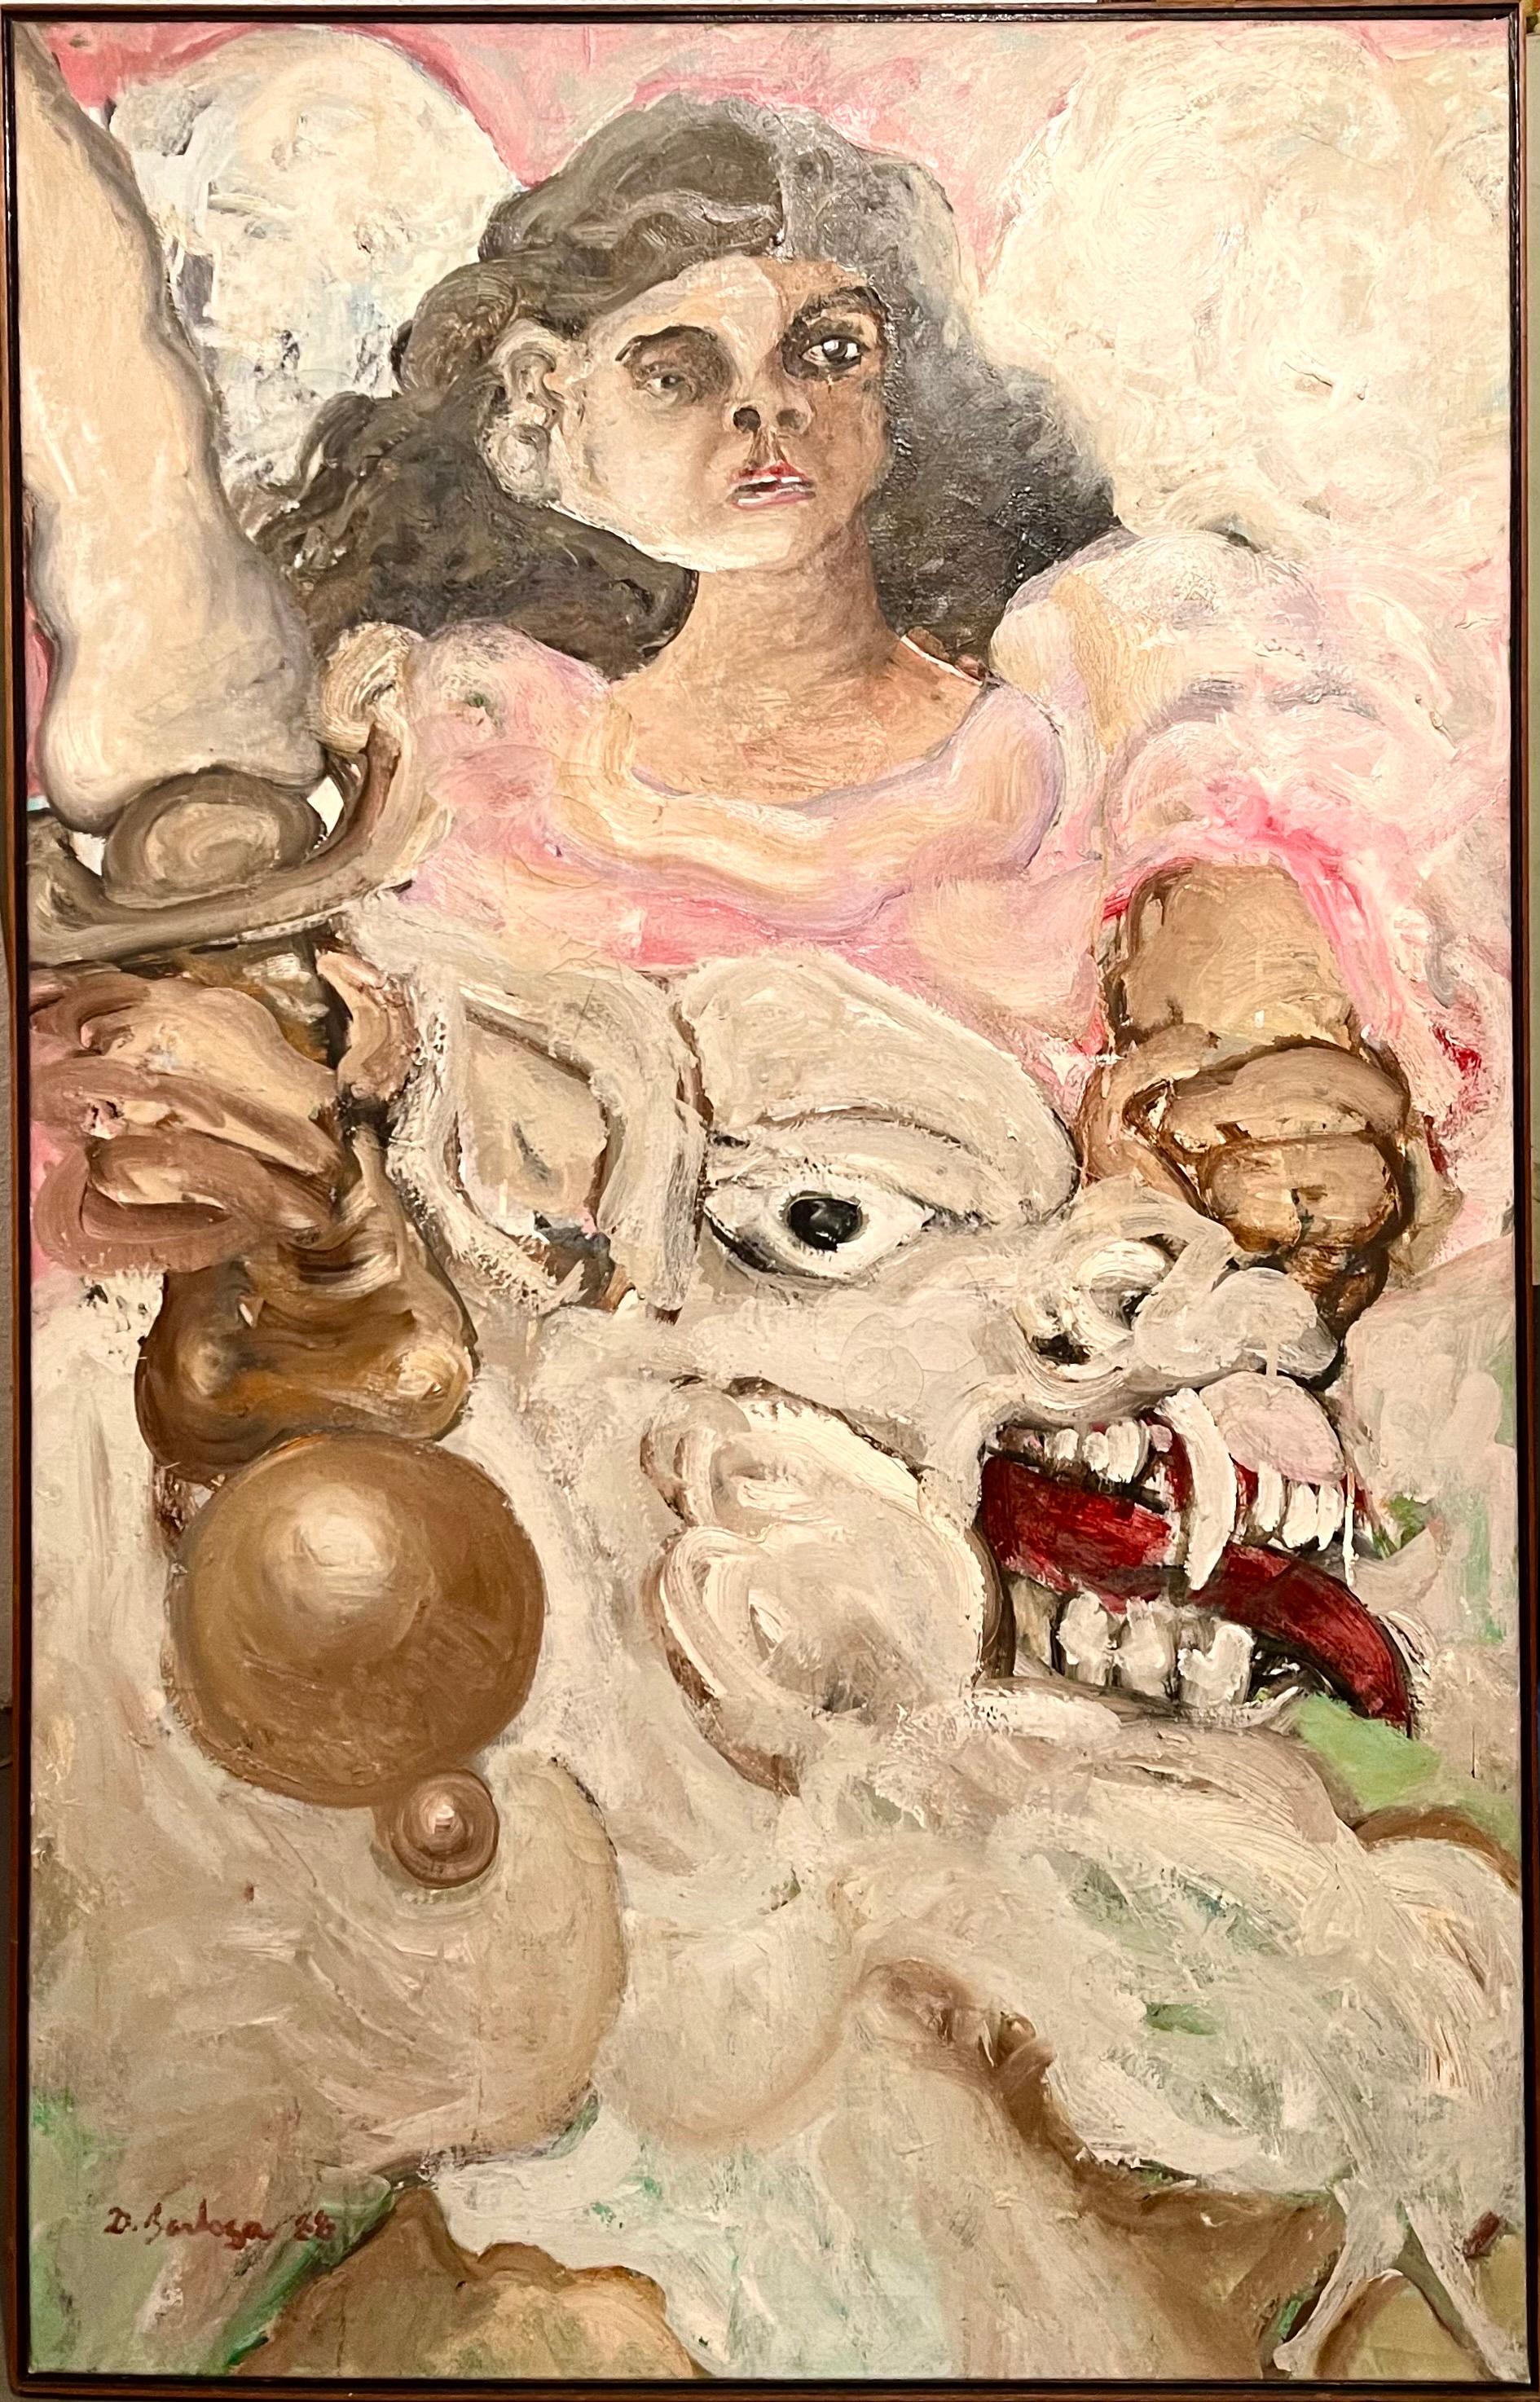 Diego Barboza - 1945-2003
  
Hand signed and dated 1988 Oil on Canvas


Diego Barboza was born the Carabobo street of Maracaibo, Venezuela on February 4, 1945. He was a Venezuelan Neo Figurative Painter who is among the most famous and influential